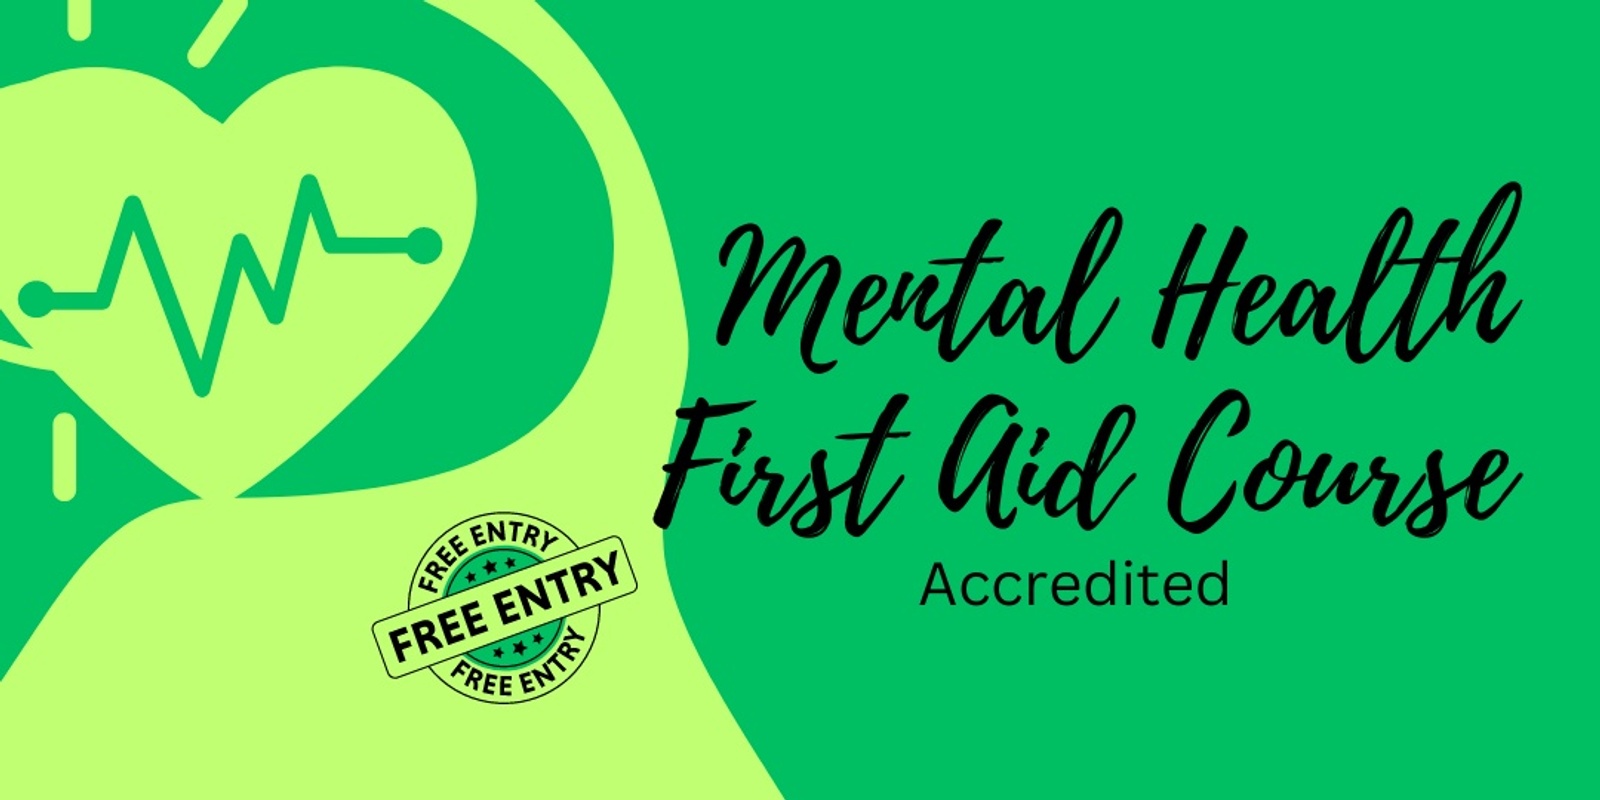 Banner image for Mental Health First Aid Course